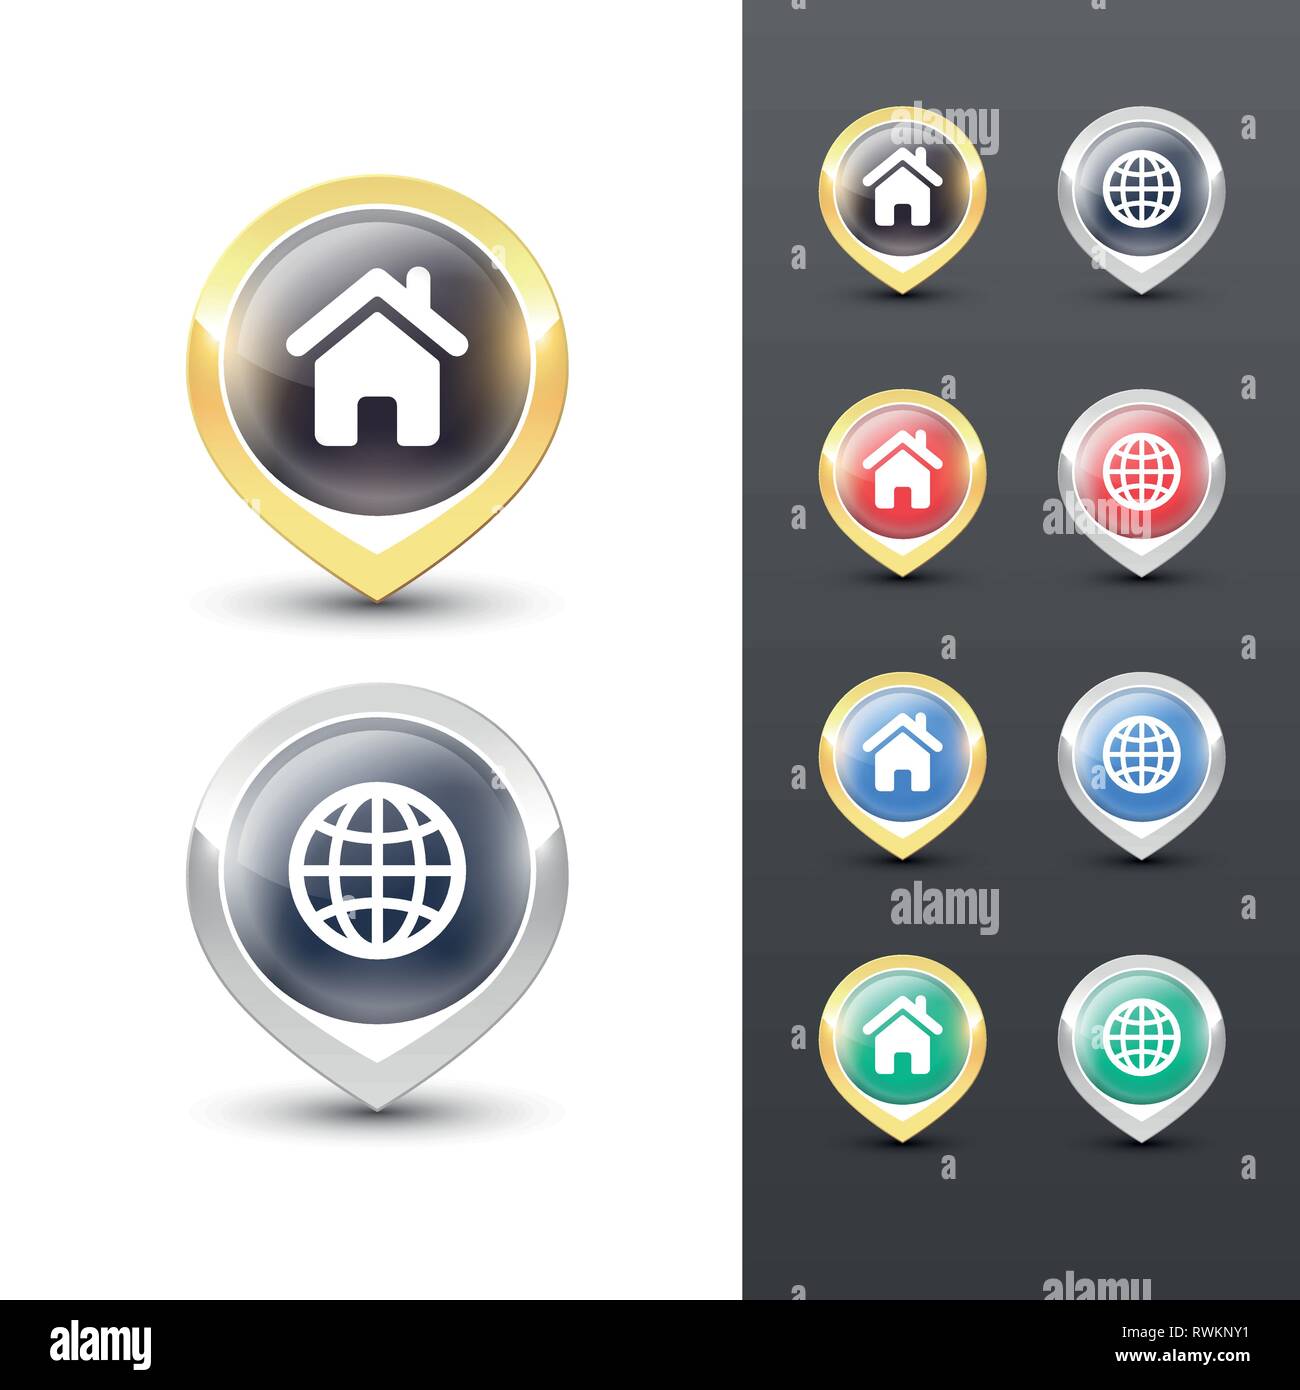 Pointer icons with metallic gold and silver border, map and home symbols inside. Vector location pins isolated on white background. Stock Vector